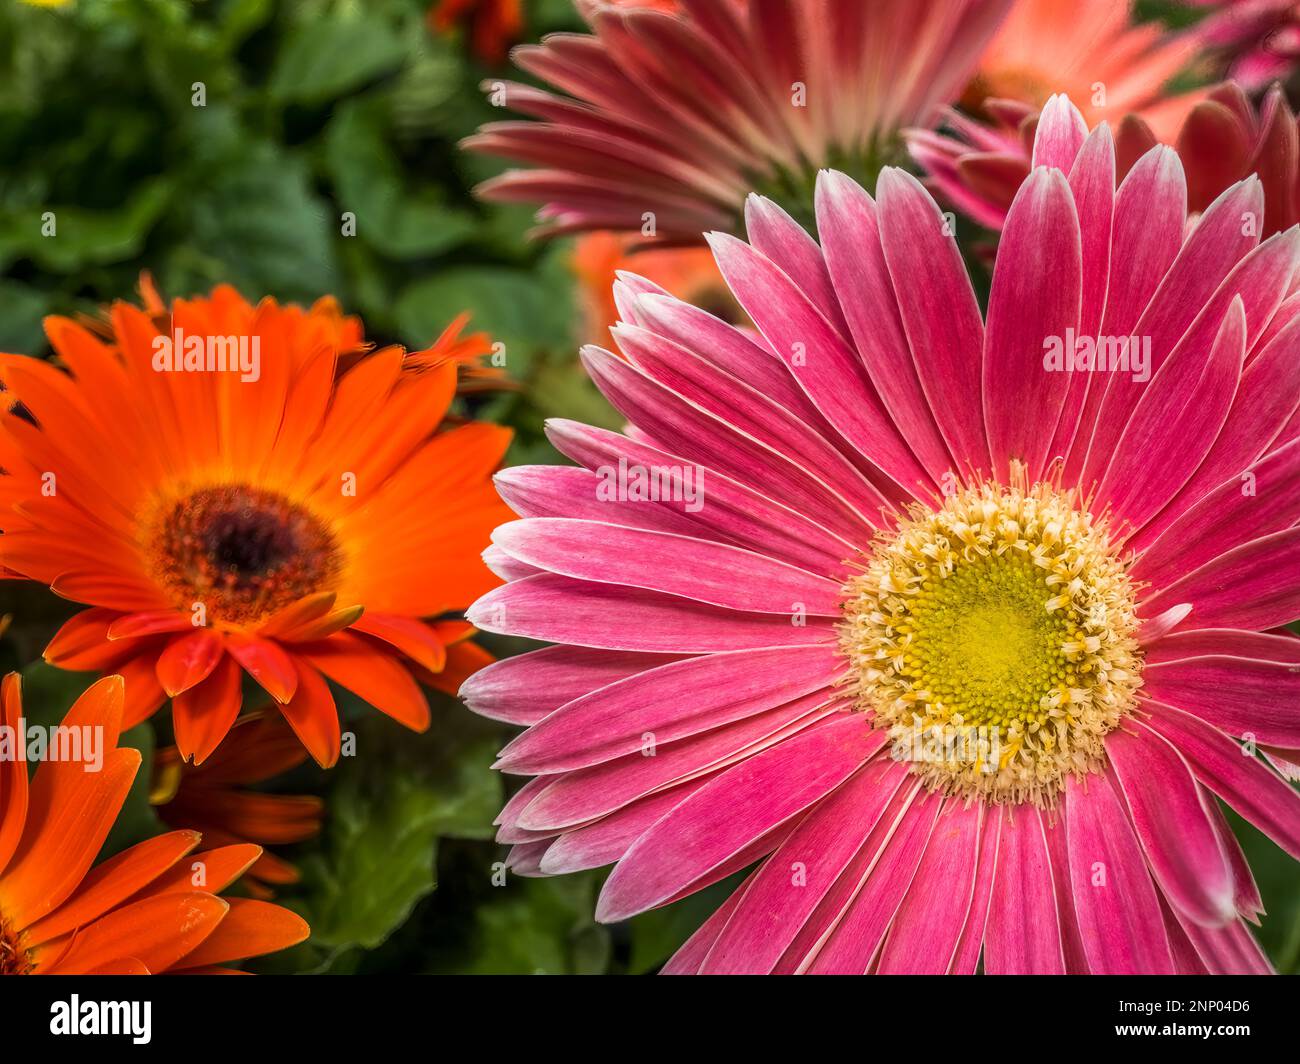 Close-up of pink daisy flowers Stock Photo